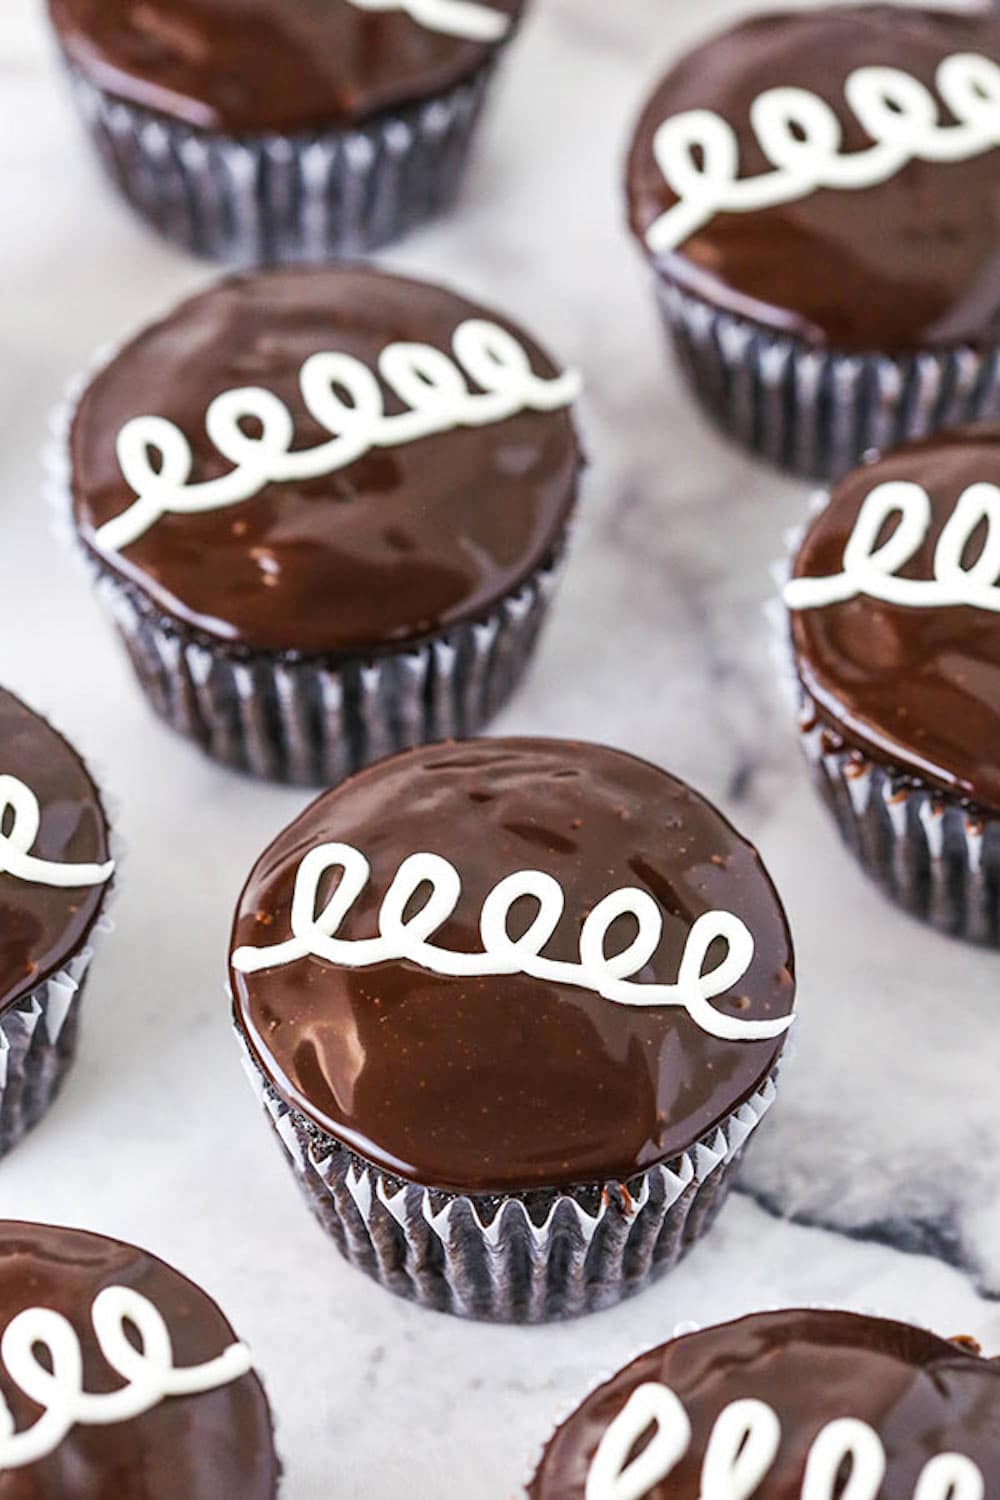 Eight Marshmallow-Filled Chocolate Cupcakes on a Marble Counter